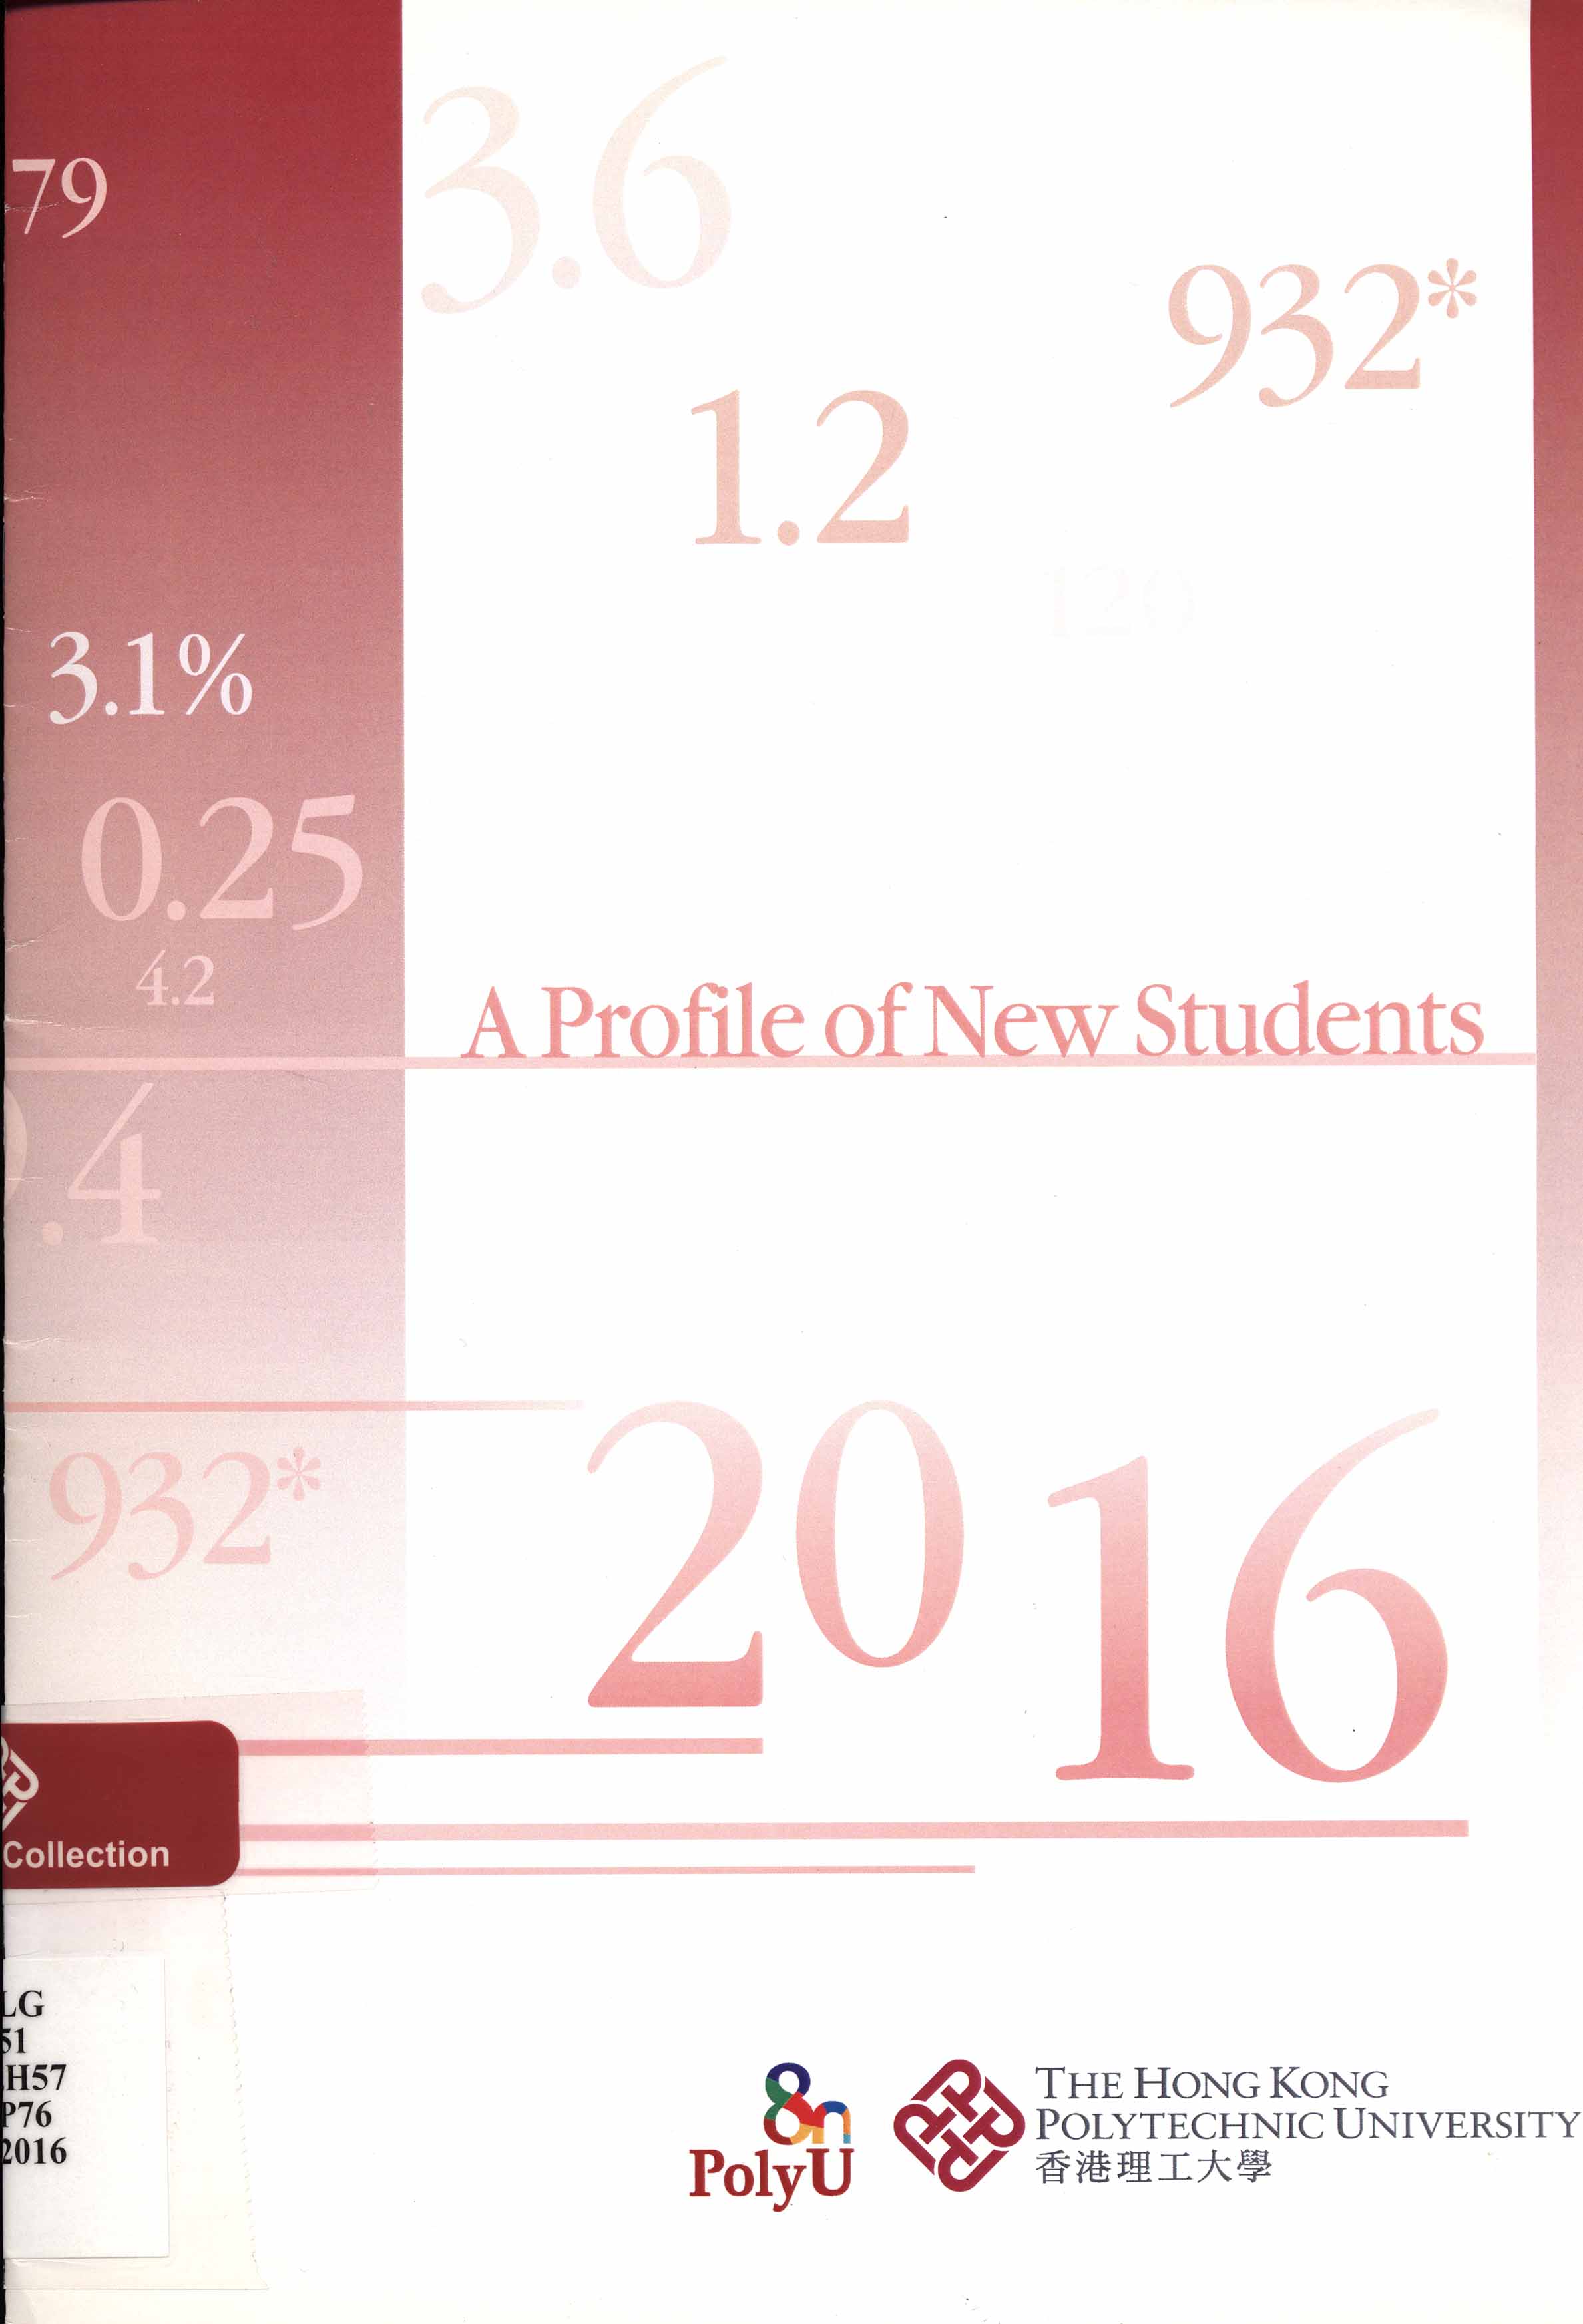  A Profile of new students [2016]